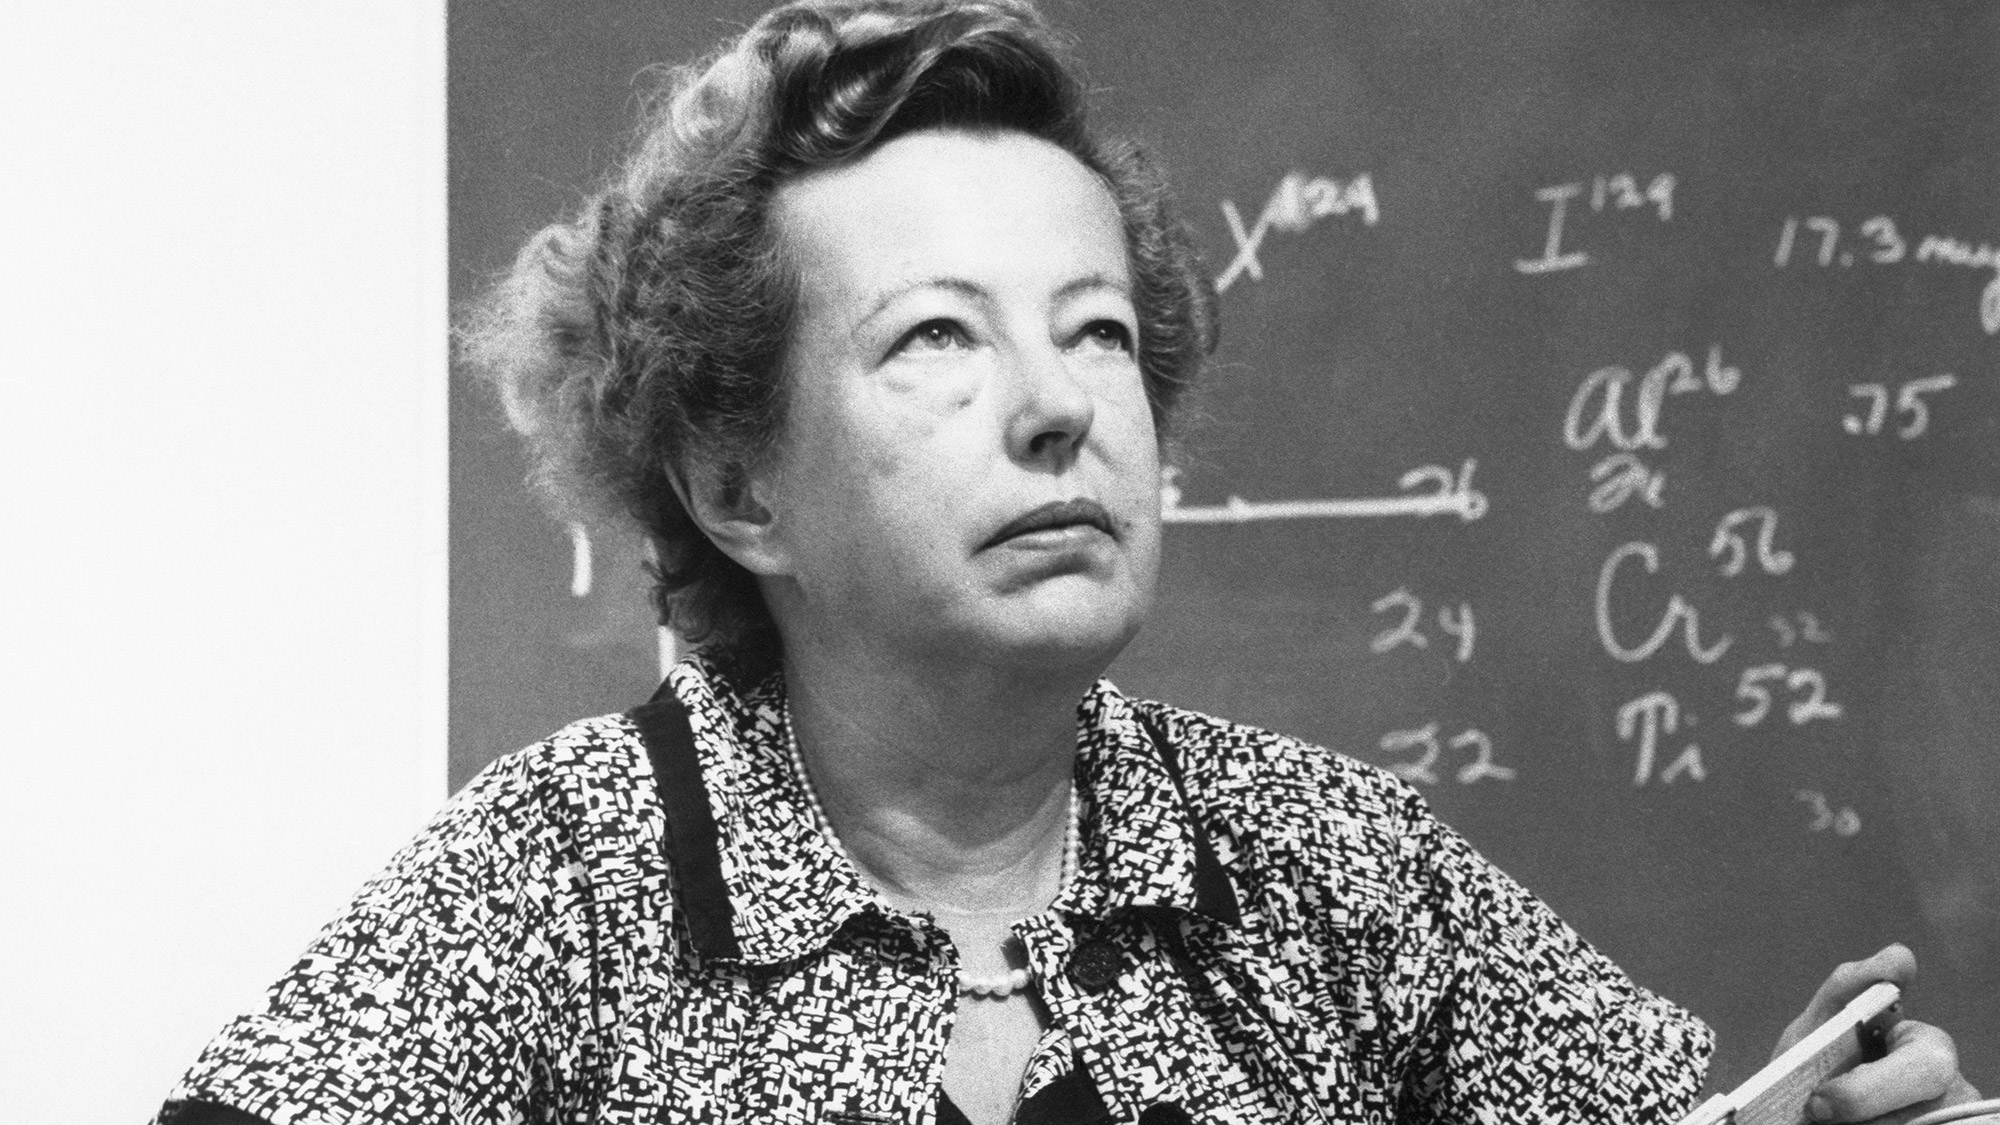 Dr. Maria Goeppert Mayer (shown in file photo) of the University of California was named a co-winner of the 1963 Nobel Prize for Physics. She and Prof. Hans D. Jenson of the University of Heidelberg in Germany were awarded for their joint discoveries on nuclear shell structure. Prof. Eugene Wigner of Princeton University shared the award with the two.